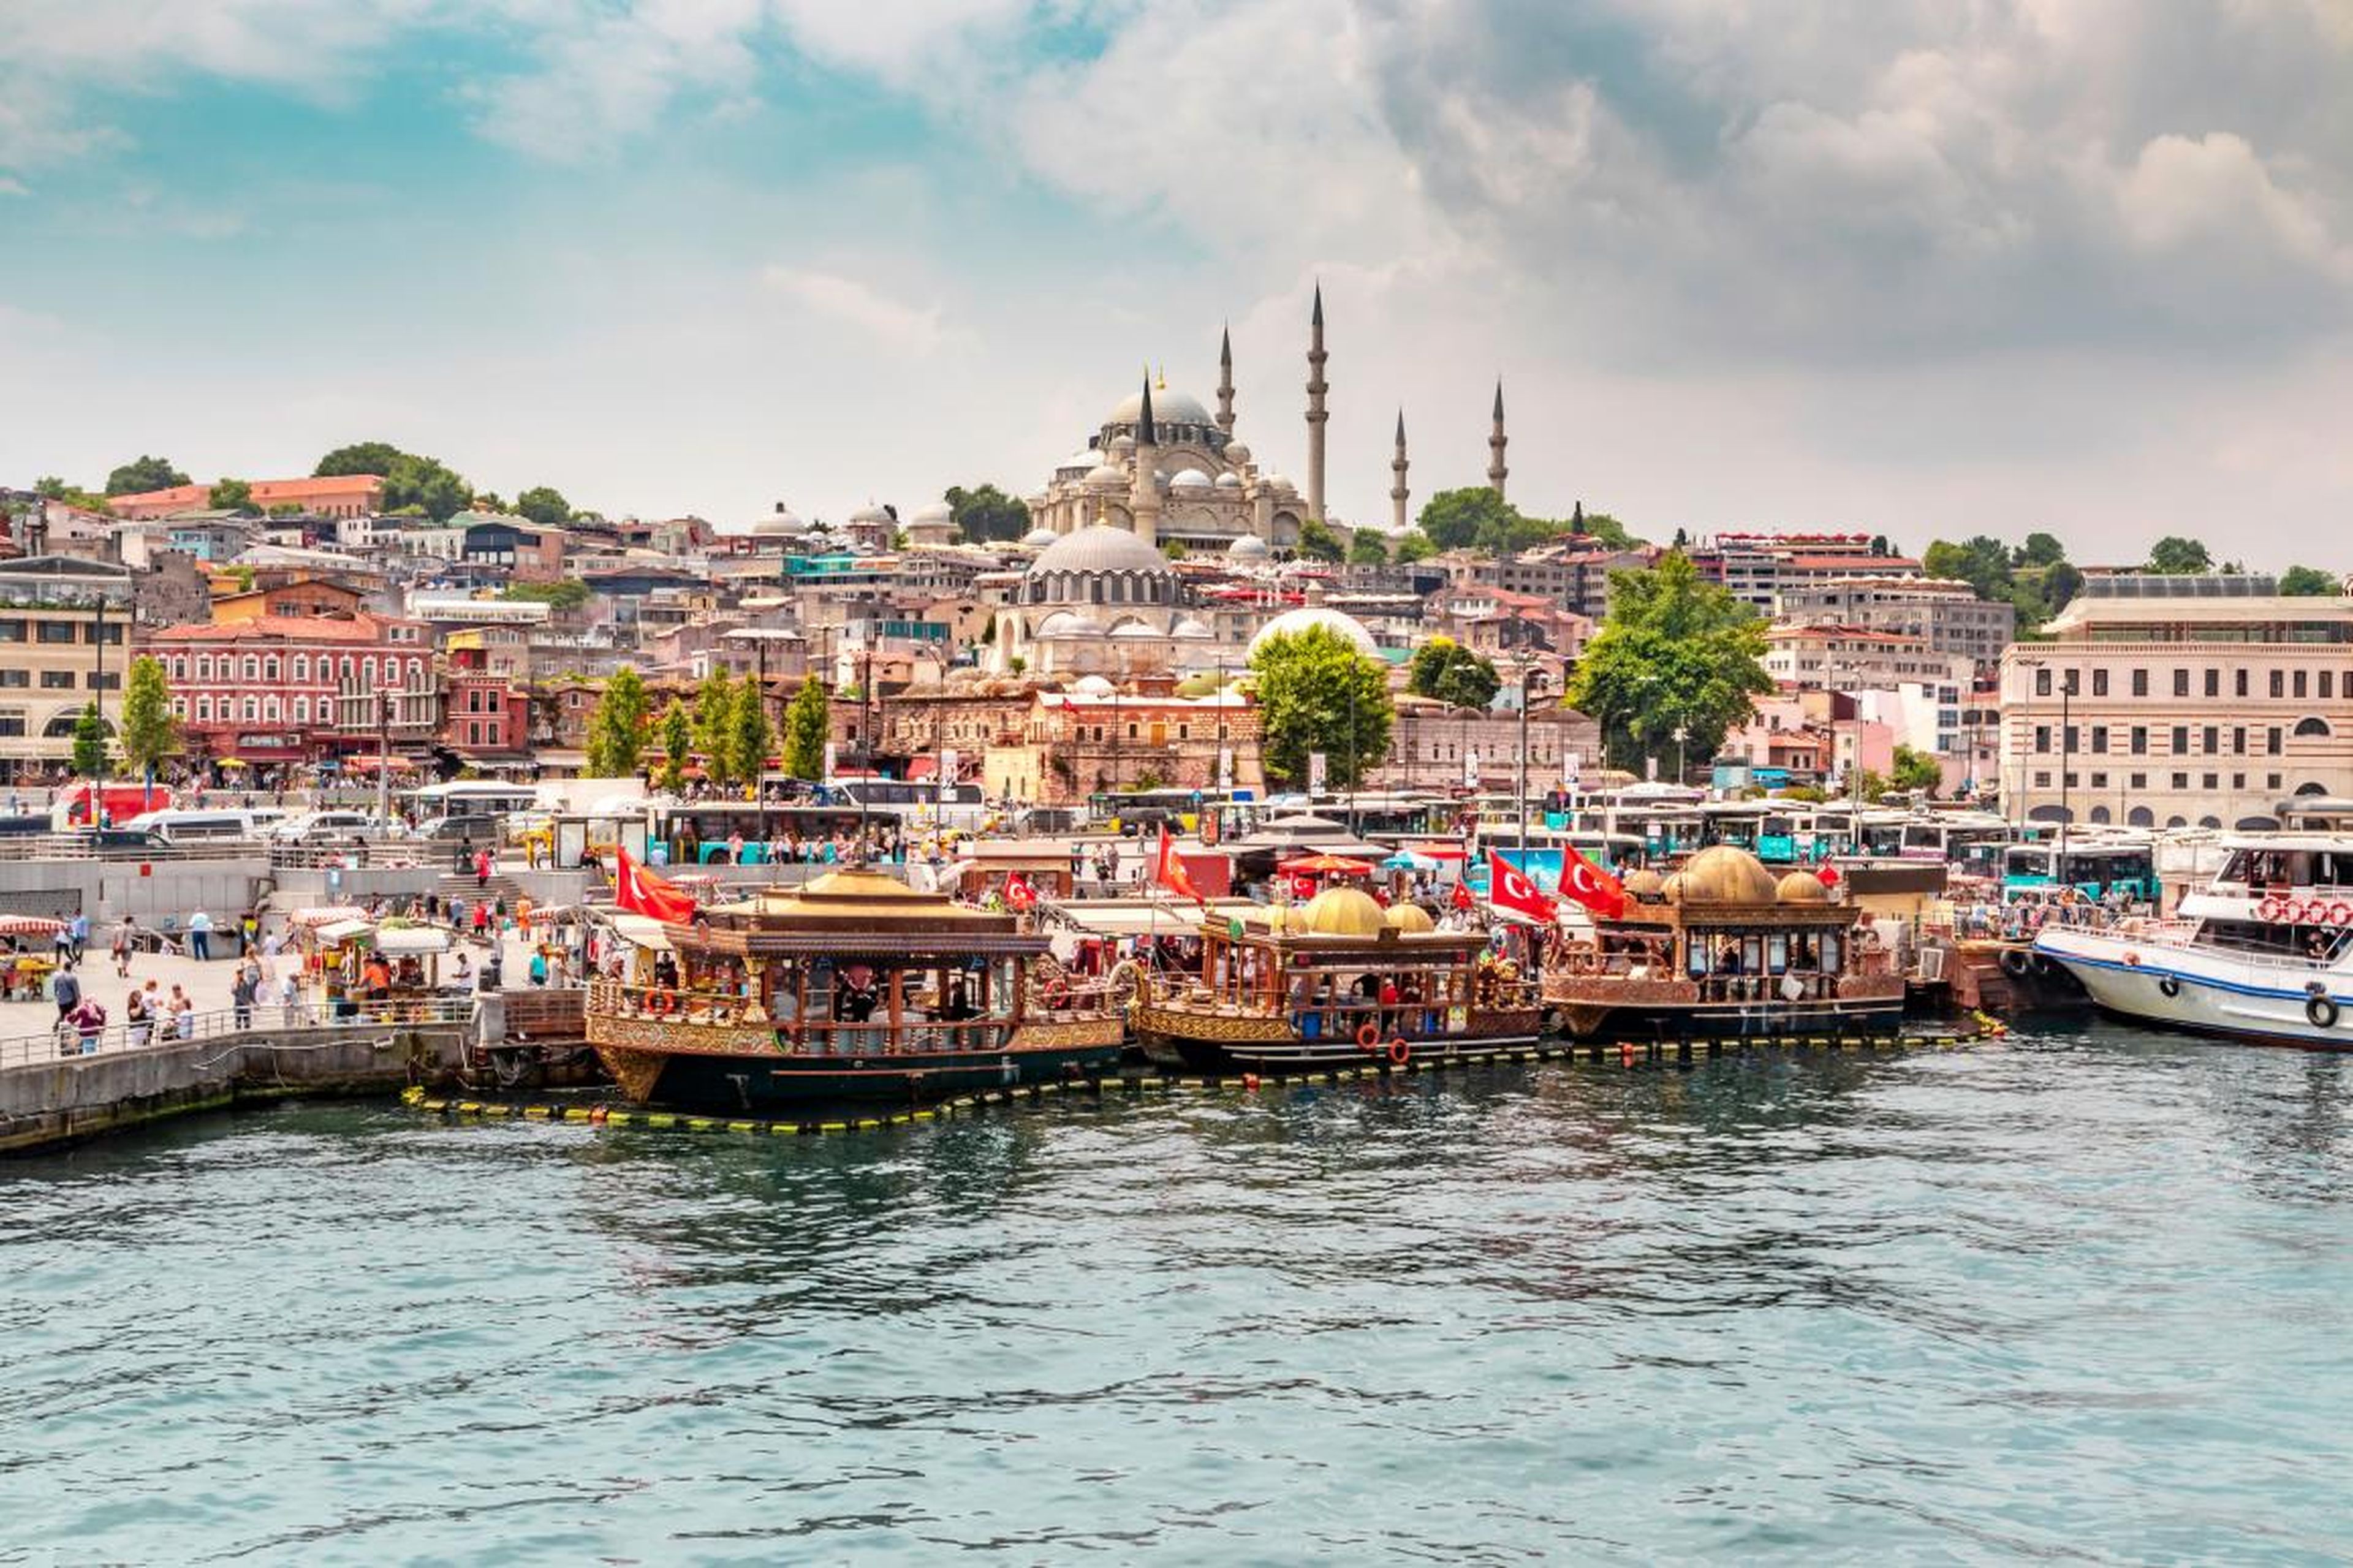 15. Istanbul, formally the capital to both the Byzantine Empire and Ottoman Empire, is Turkey's largest city.